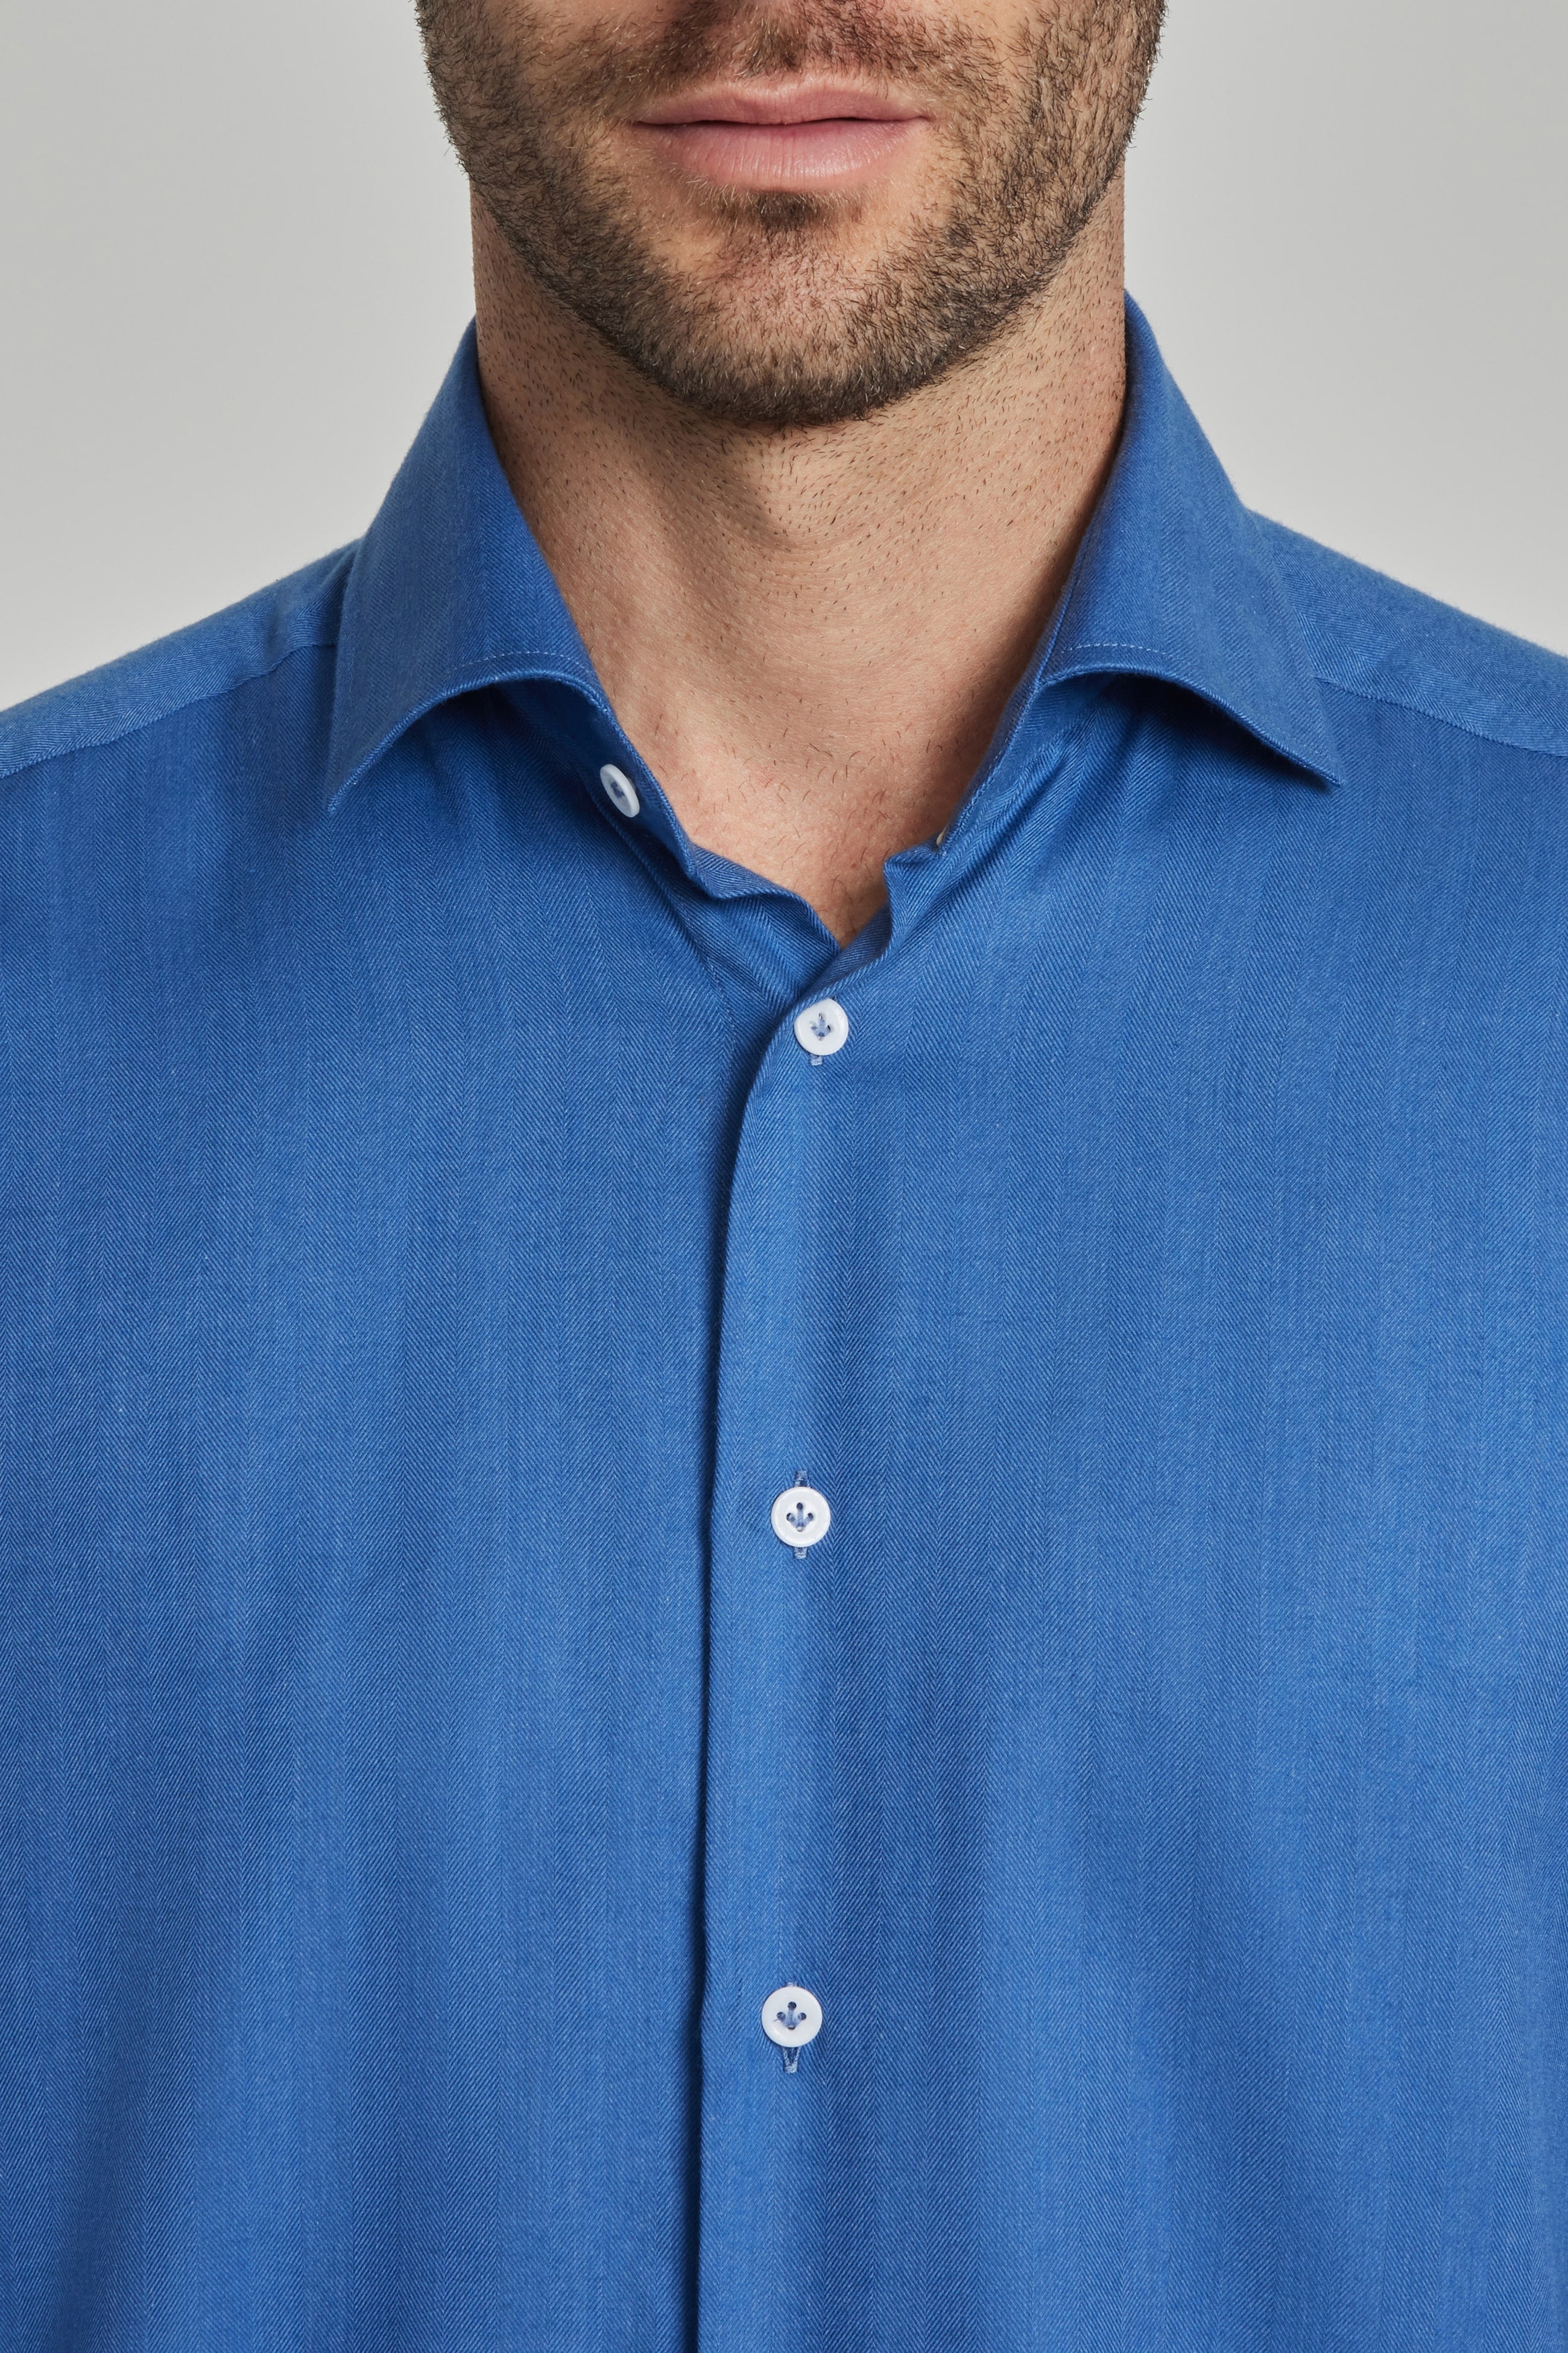 Alt view 1 Herringbone Cotton and Lyocell Shirt in Blue